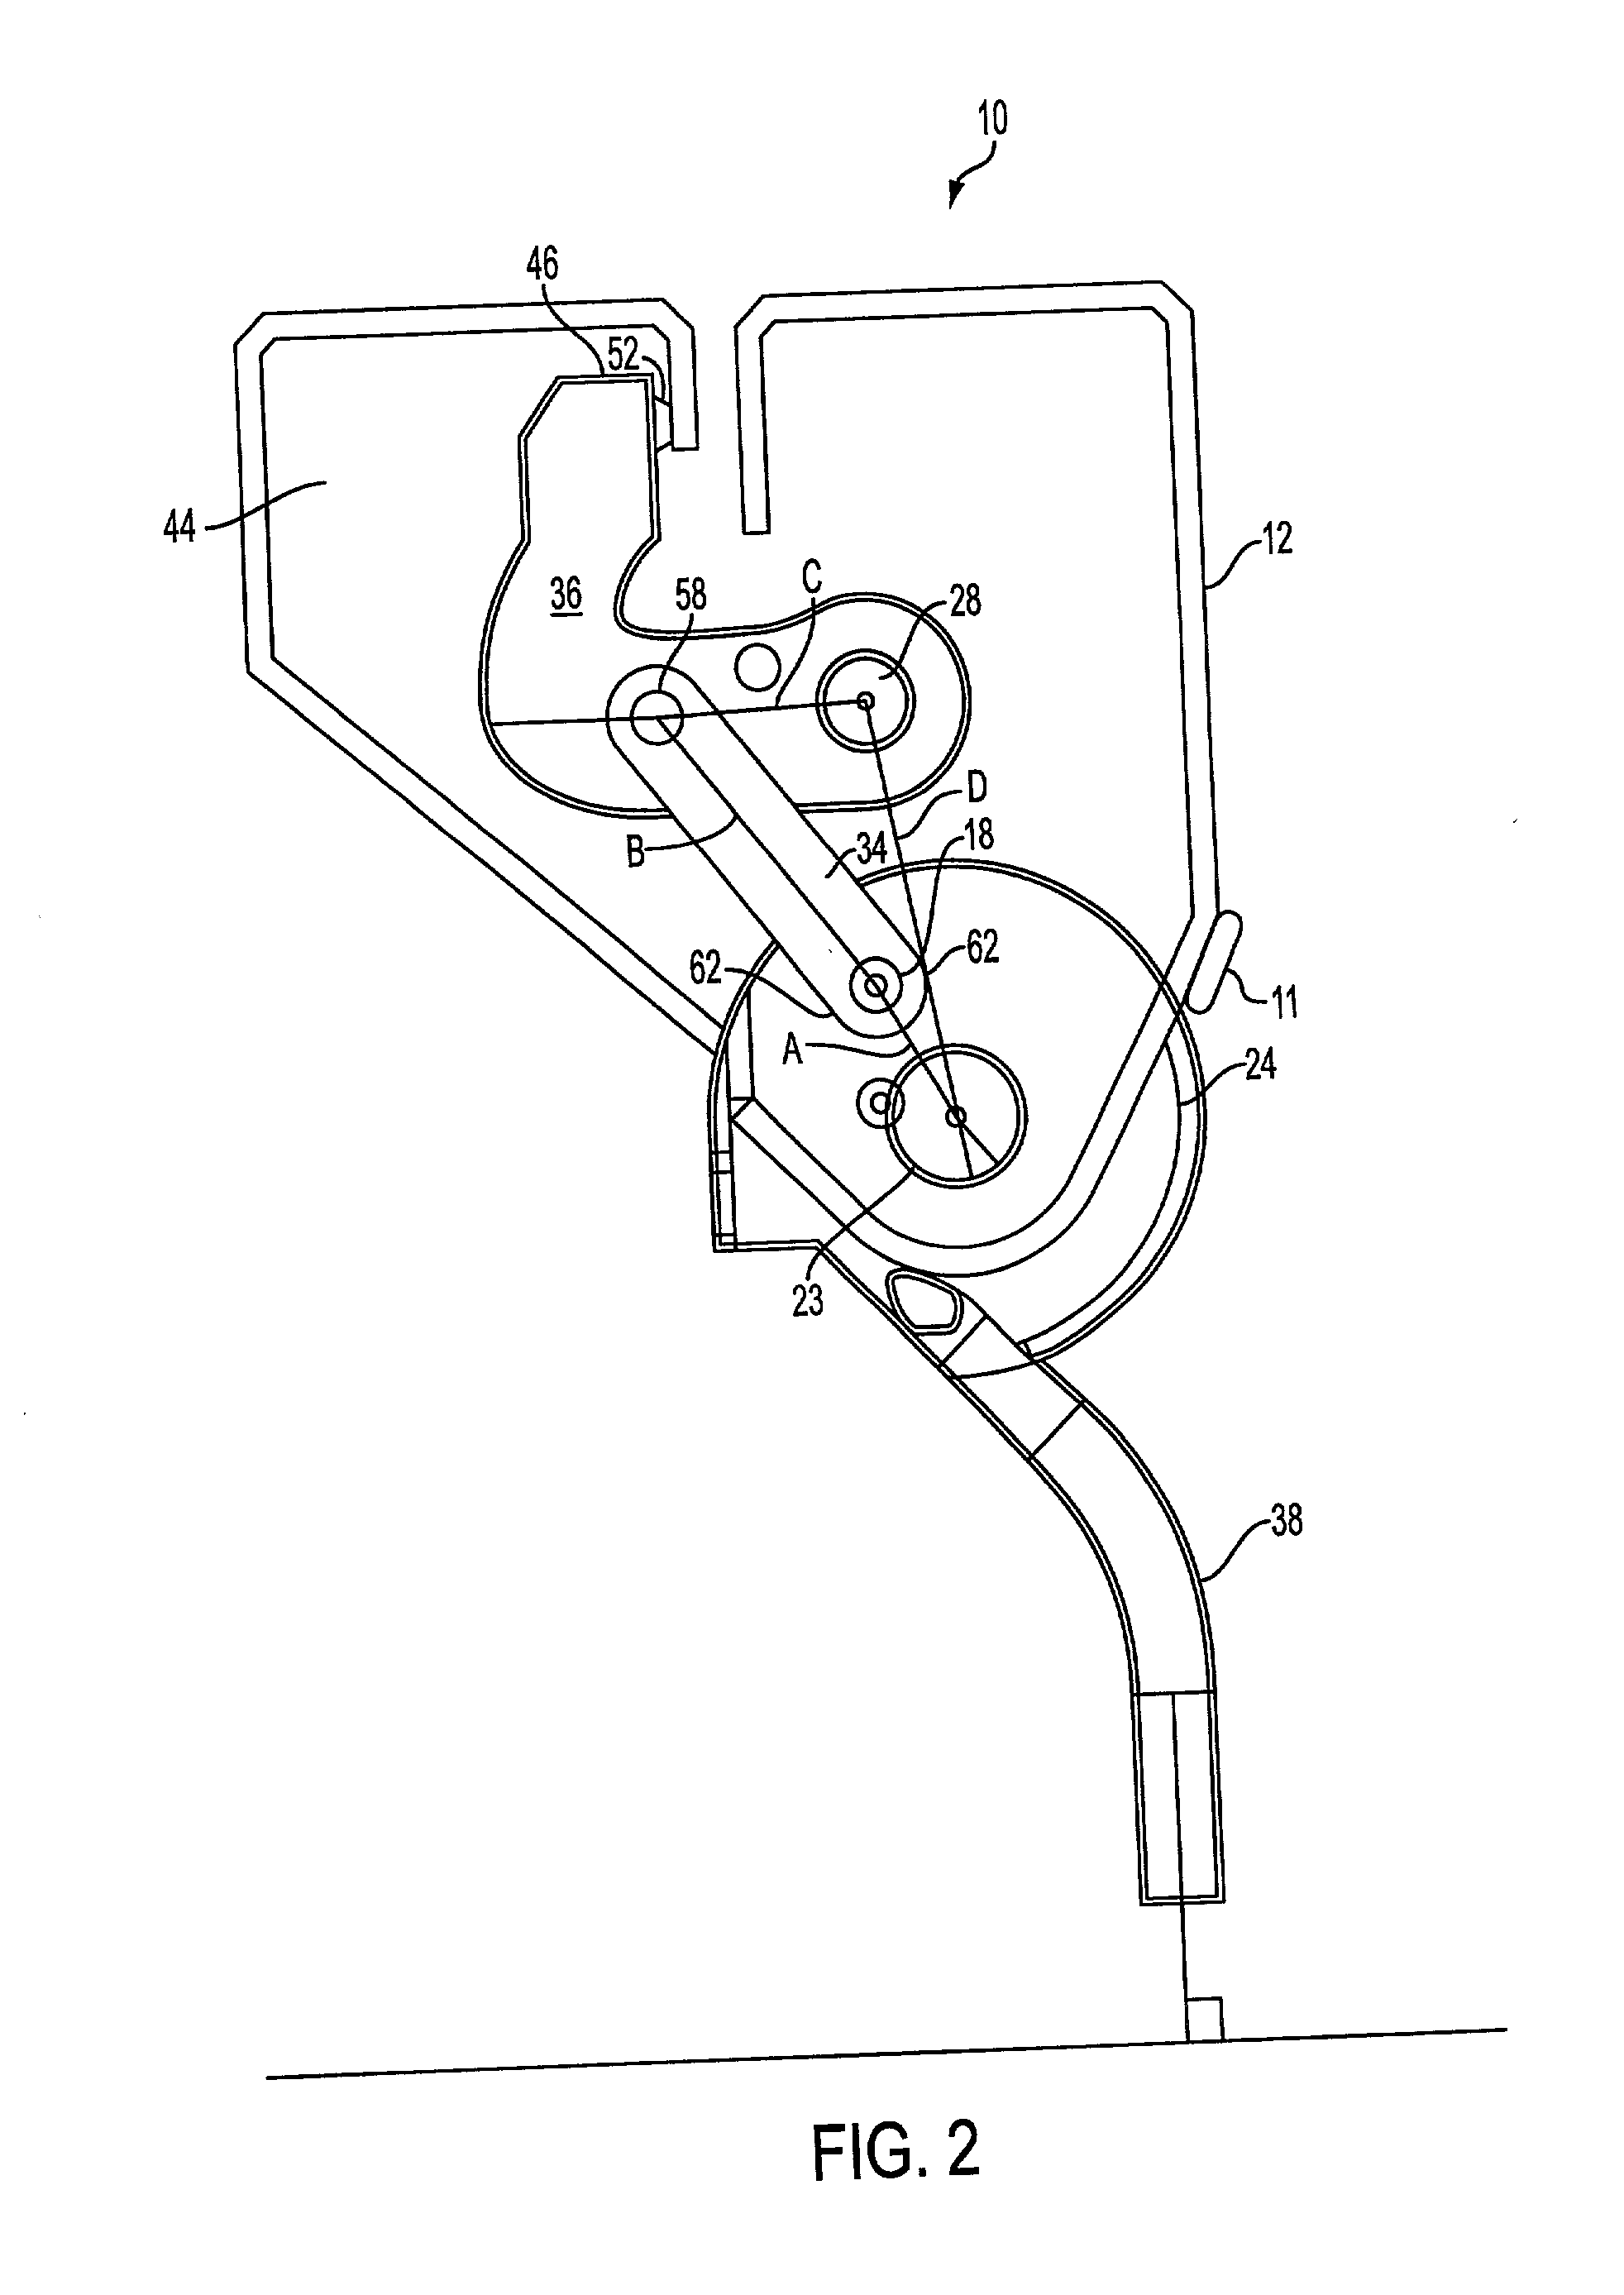 Latching device and method